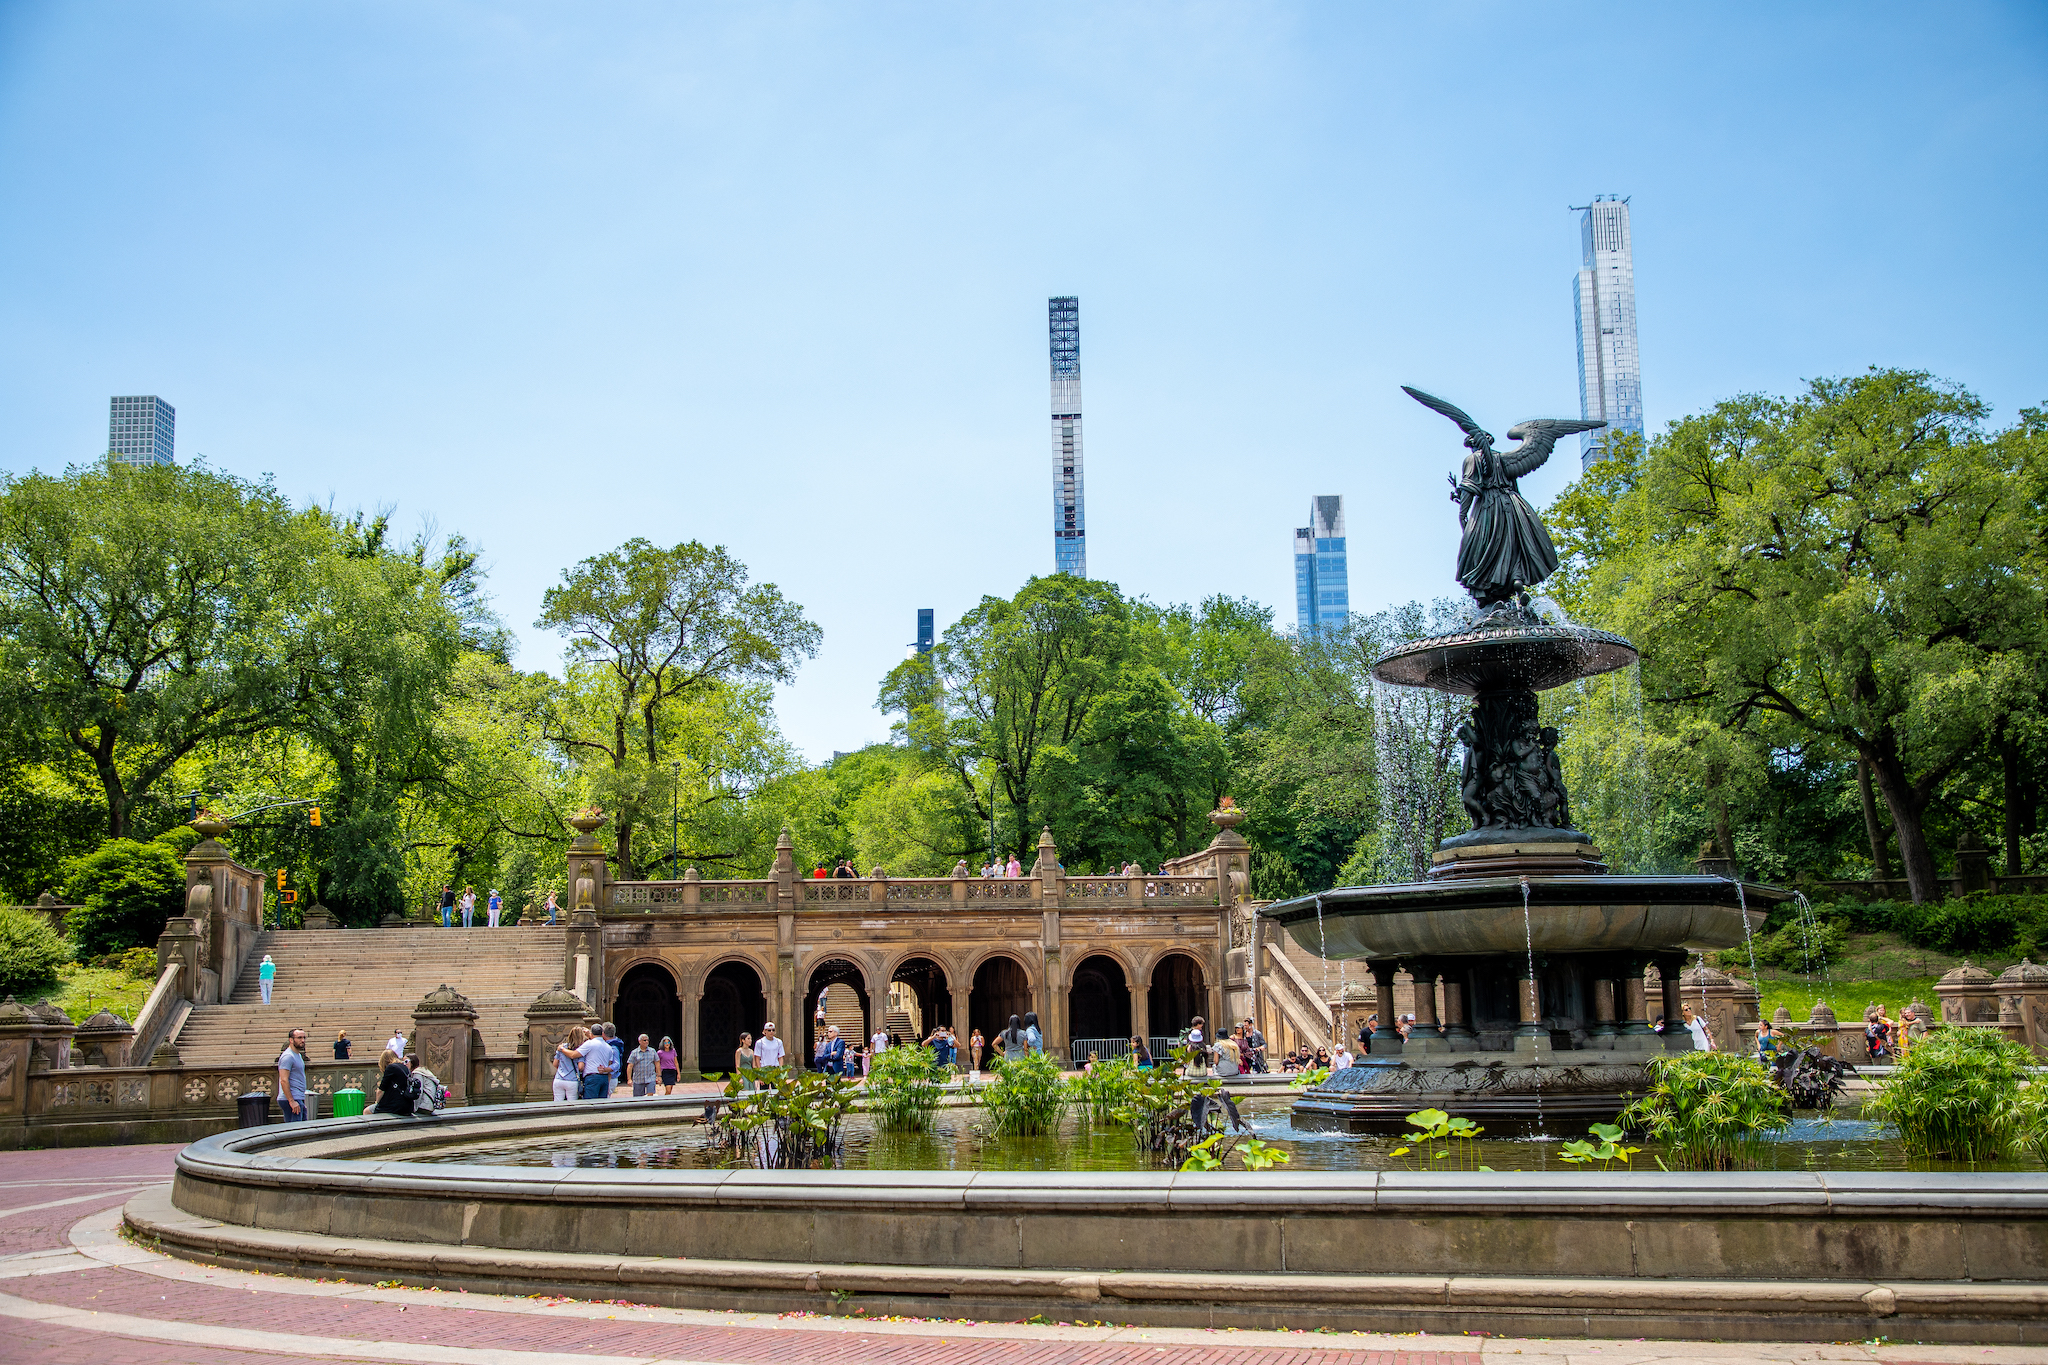 The story behind Central Park's iconic Bethesda NYC fountain